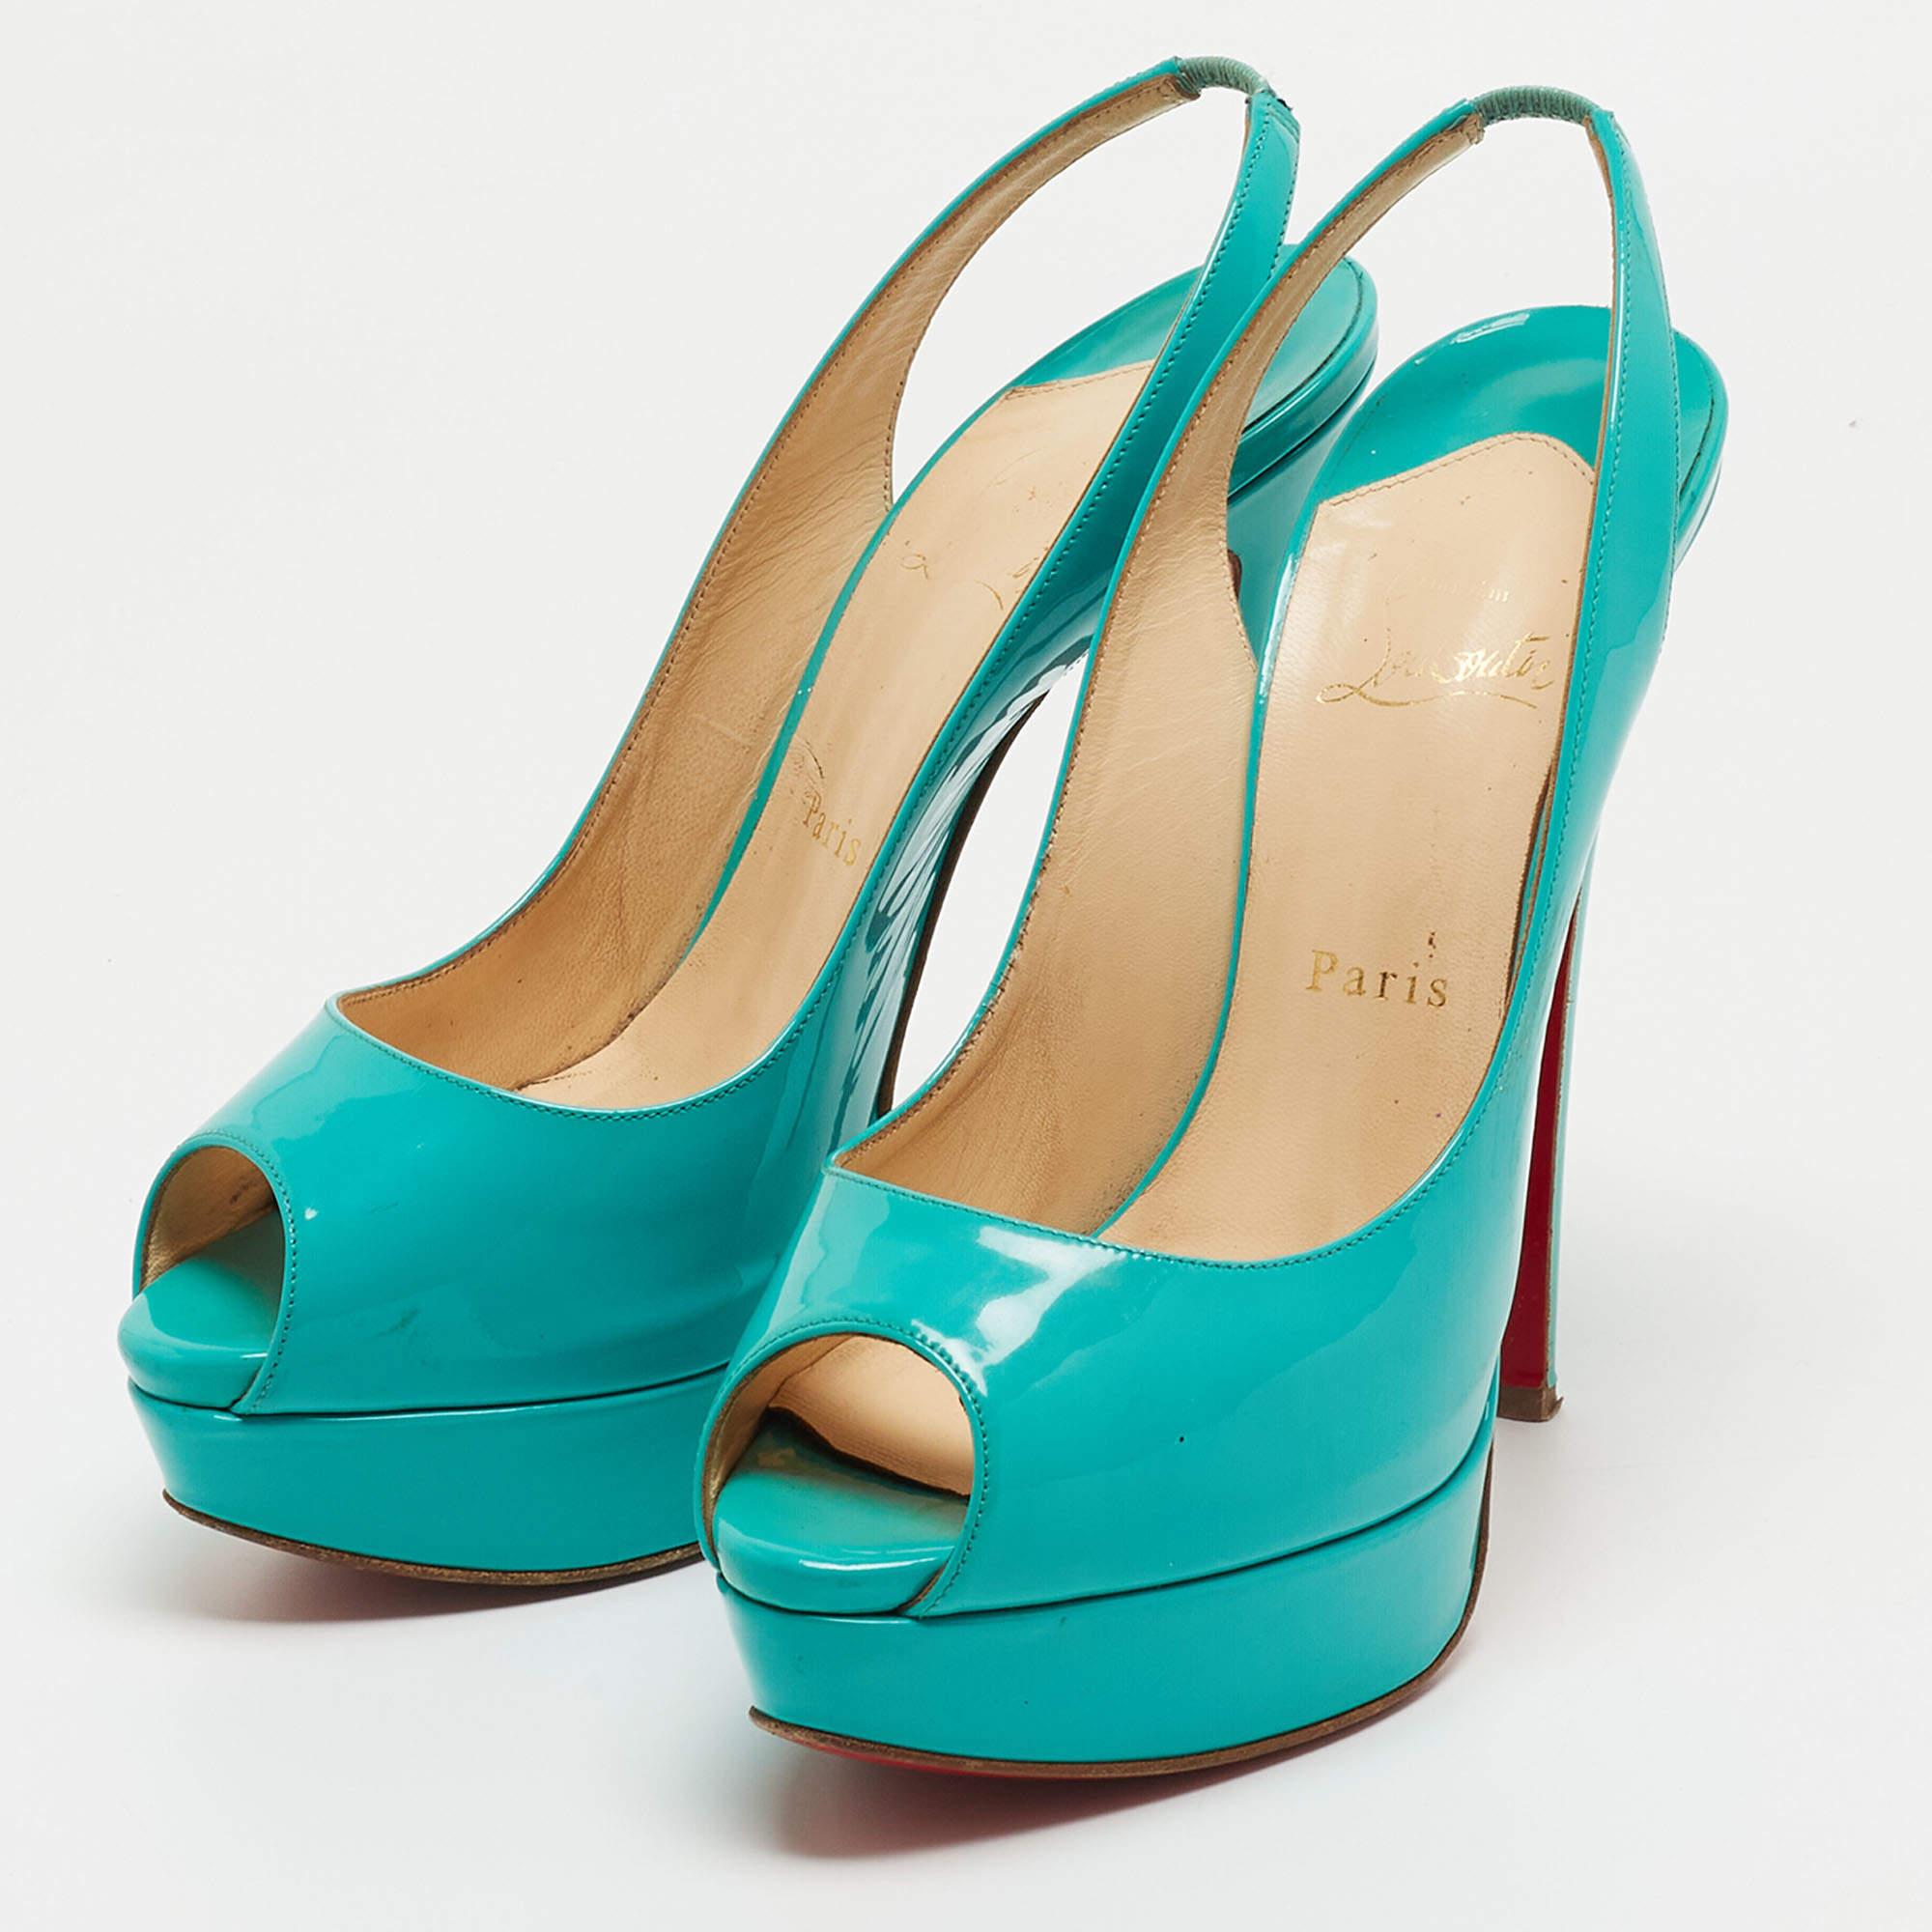 Christian Louboutin Turquoise Patent Leather Lady Peep Sling Pumps Size 39.5 In Fair Condition For Sale In Dubai, Al Qouz 2